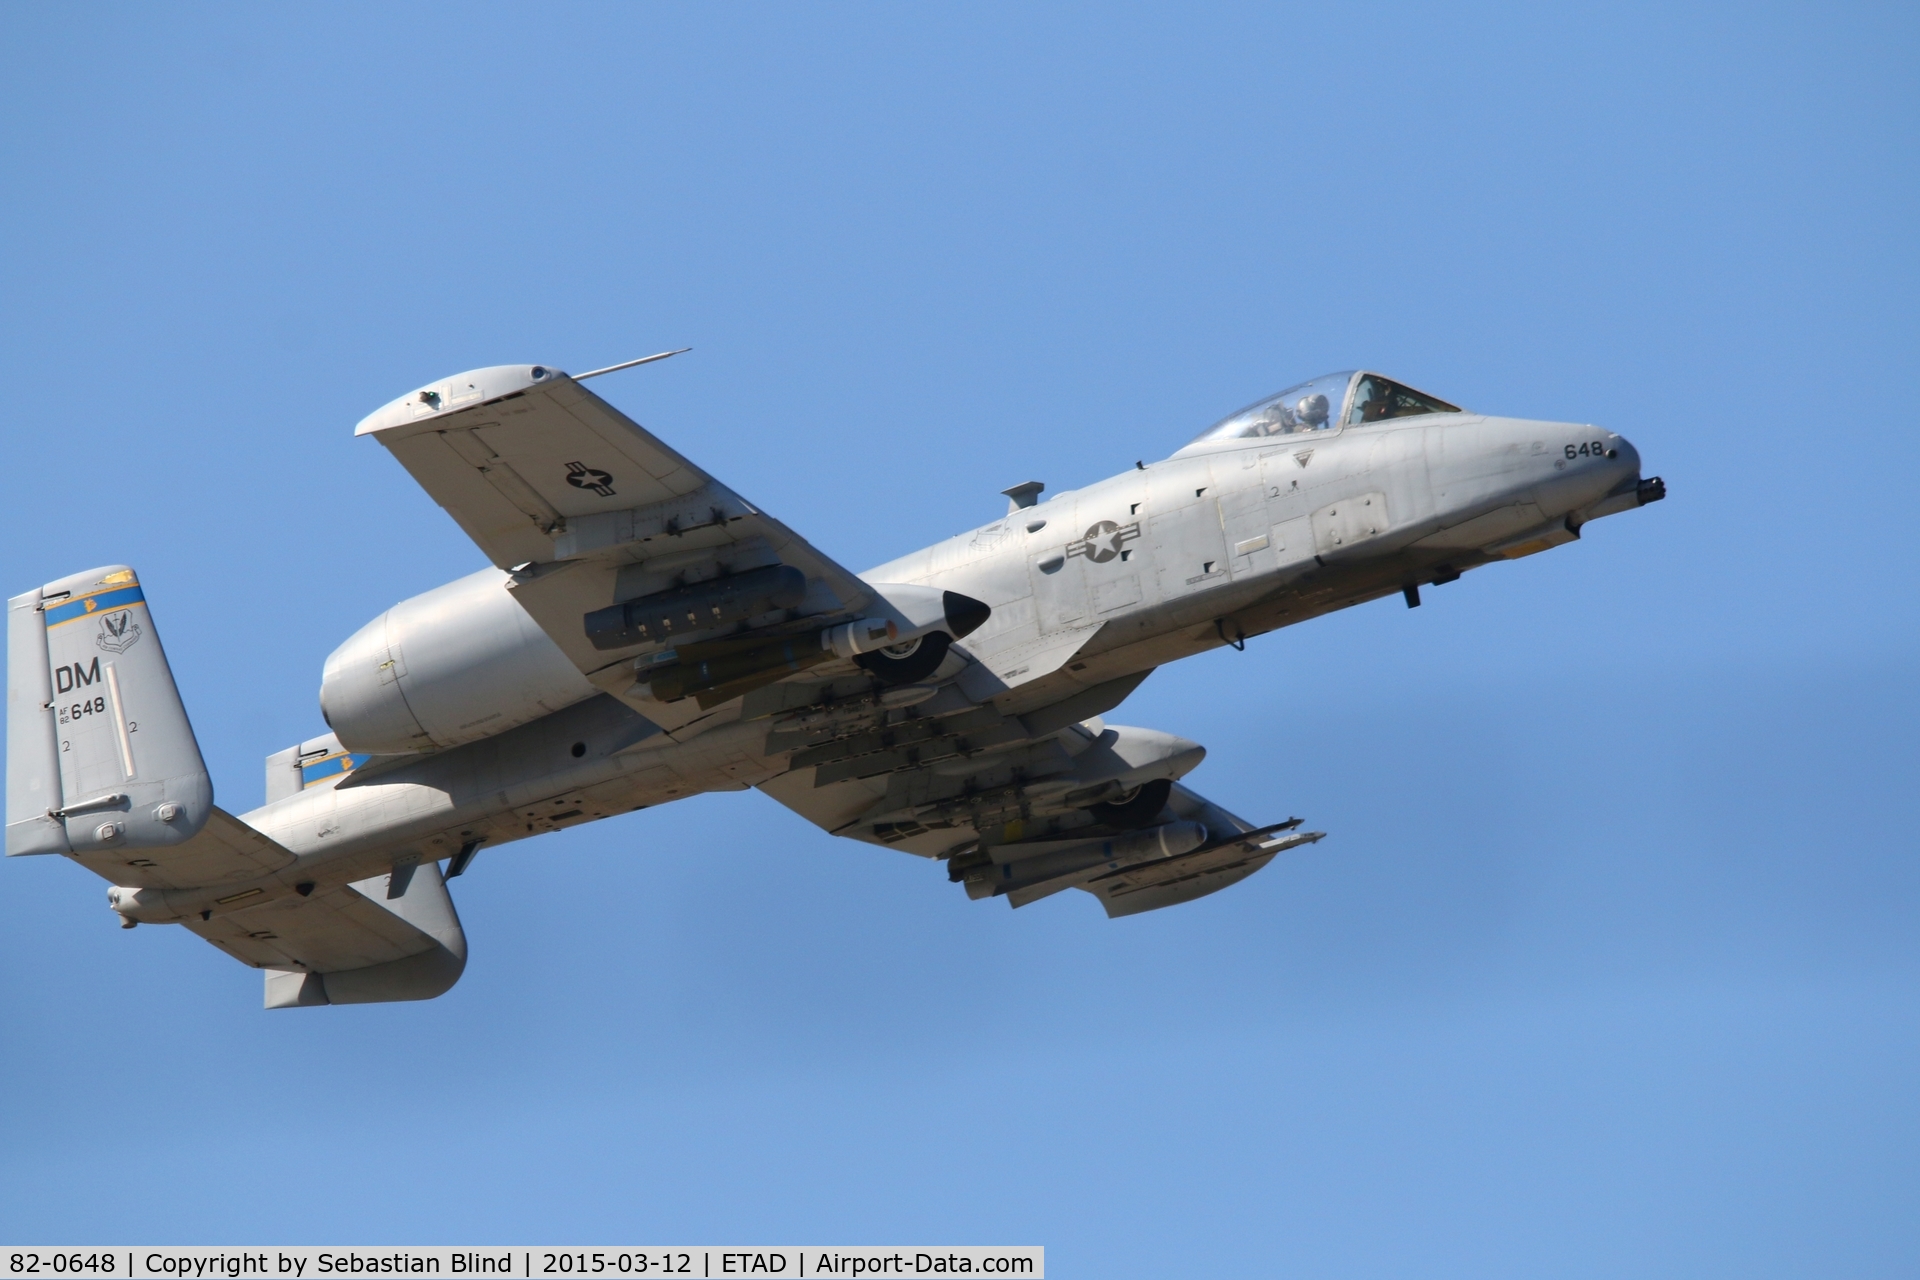 82-0648, 1982 Fairchild Republic A-10C Thunderbolt II C/N A10-0696, Takeoff @ Spangdahlem, Germany in context of Theatre Security Package 2015